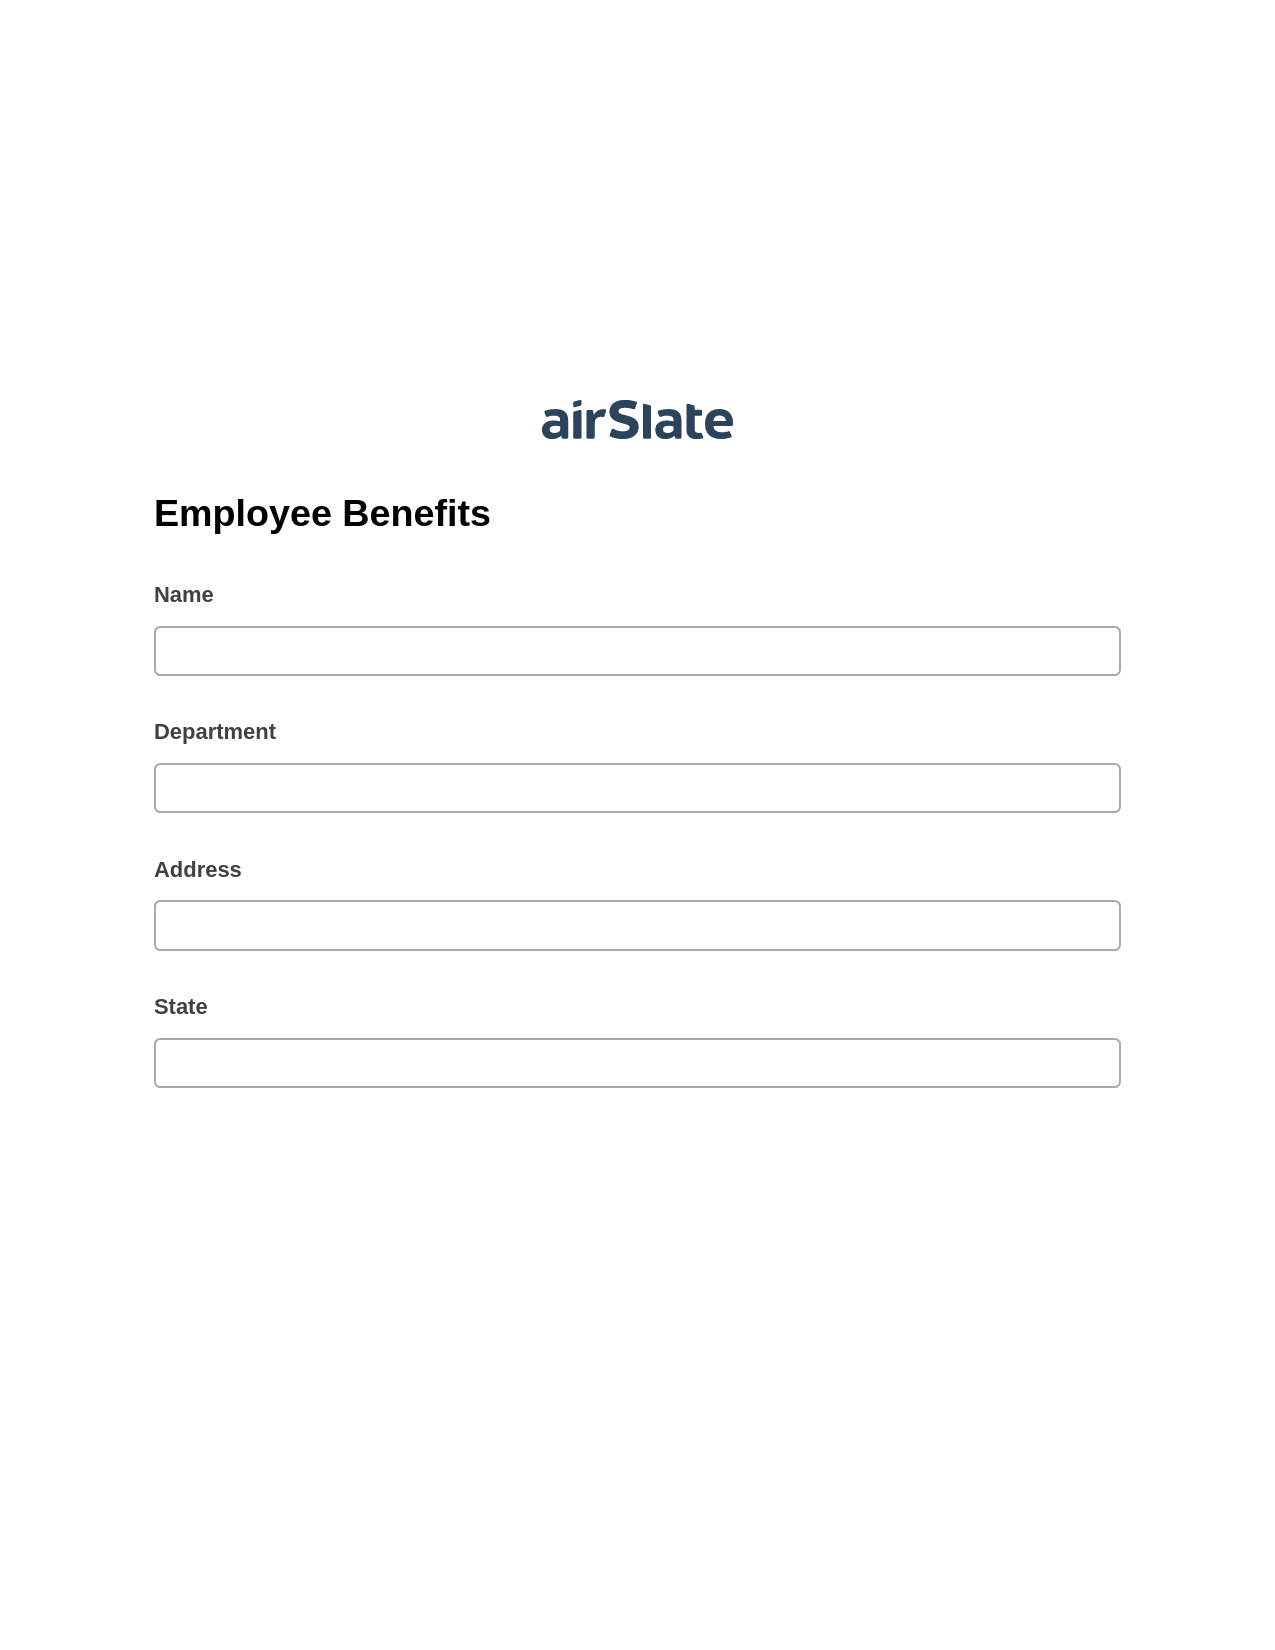 Employee Benefits Pre-fill Document Bot, Send Mailchimp Campaign Bot, Export to Formstack Documents Bot